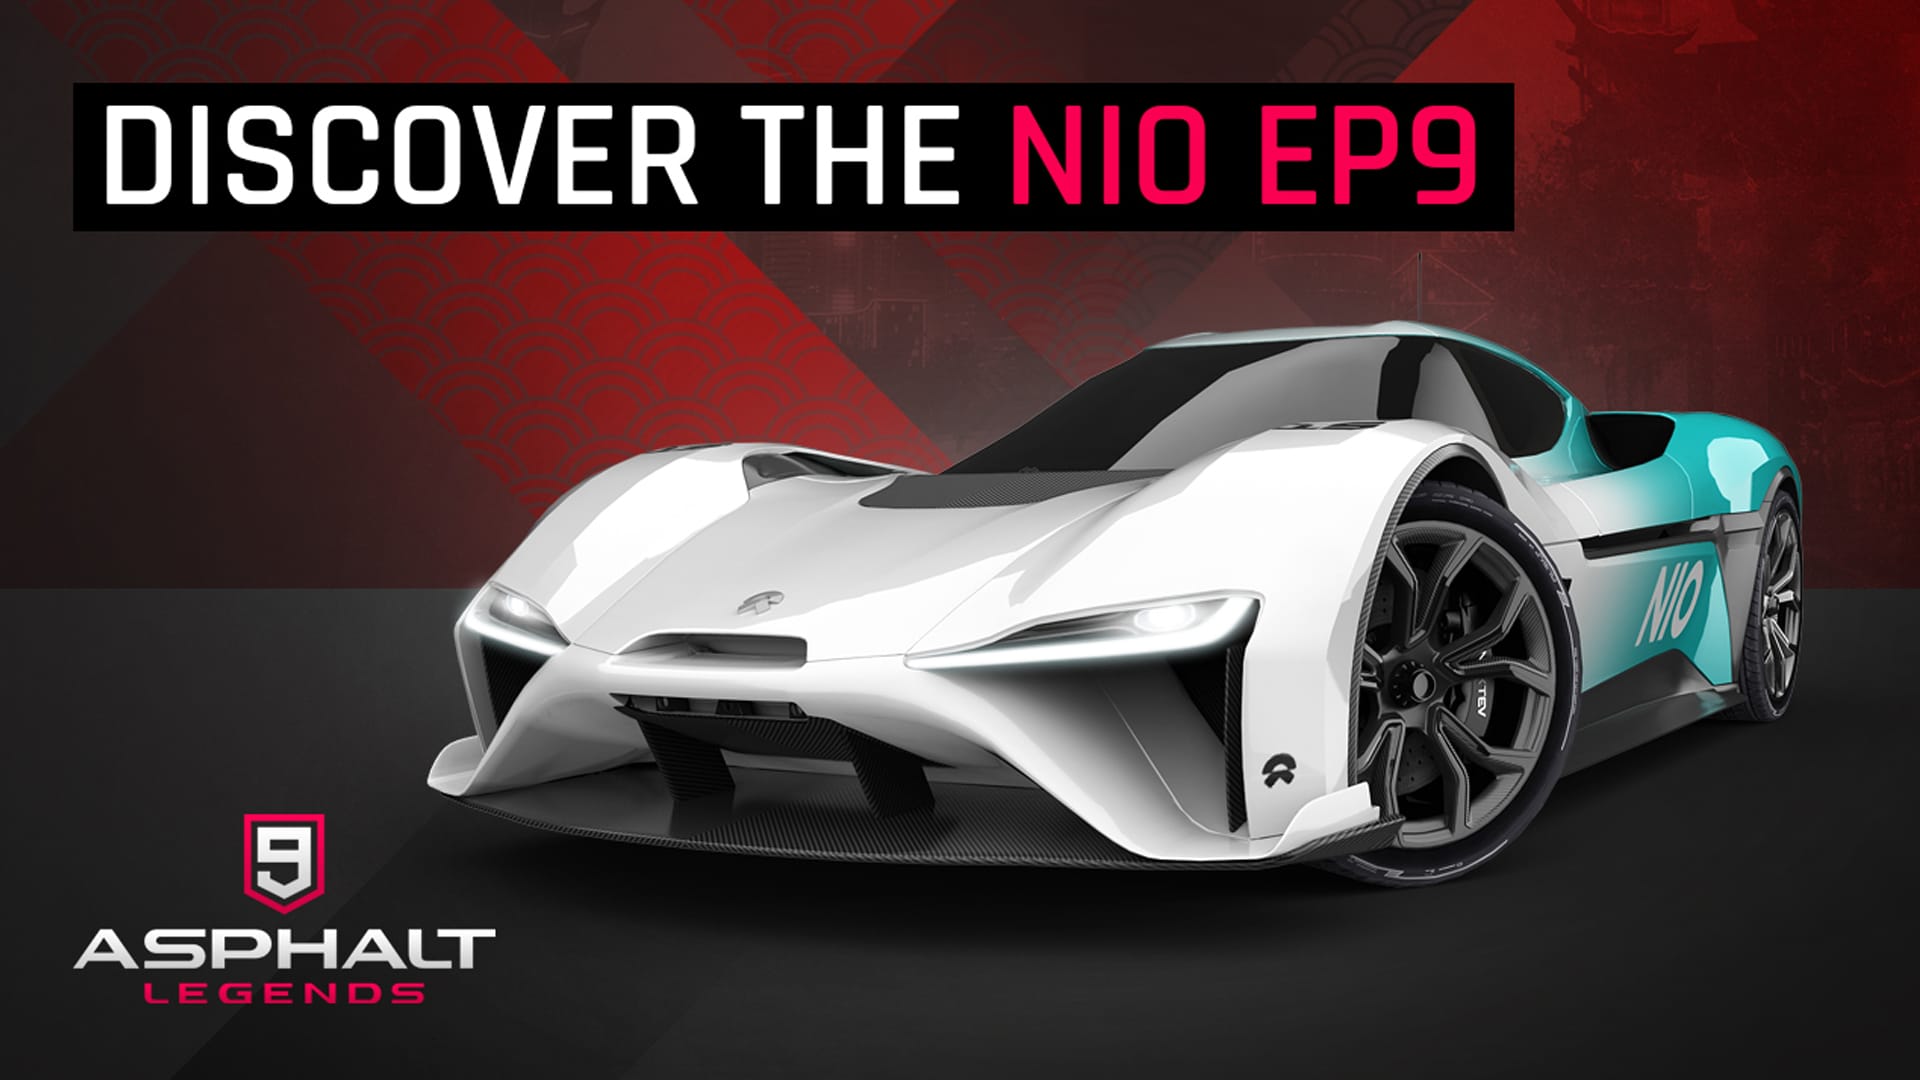 Attention! NIO EP9 Coming to Asphalt 9!